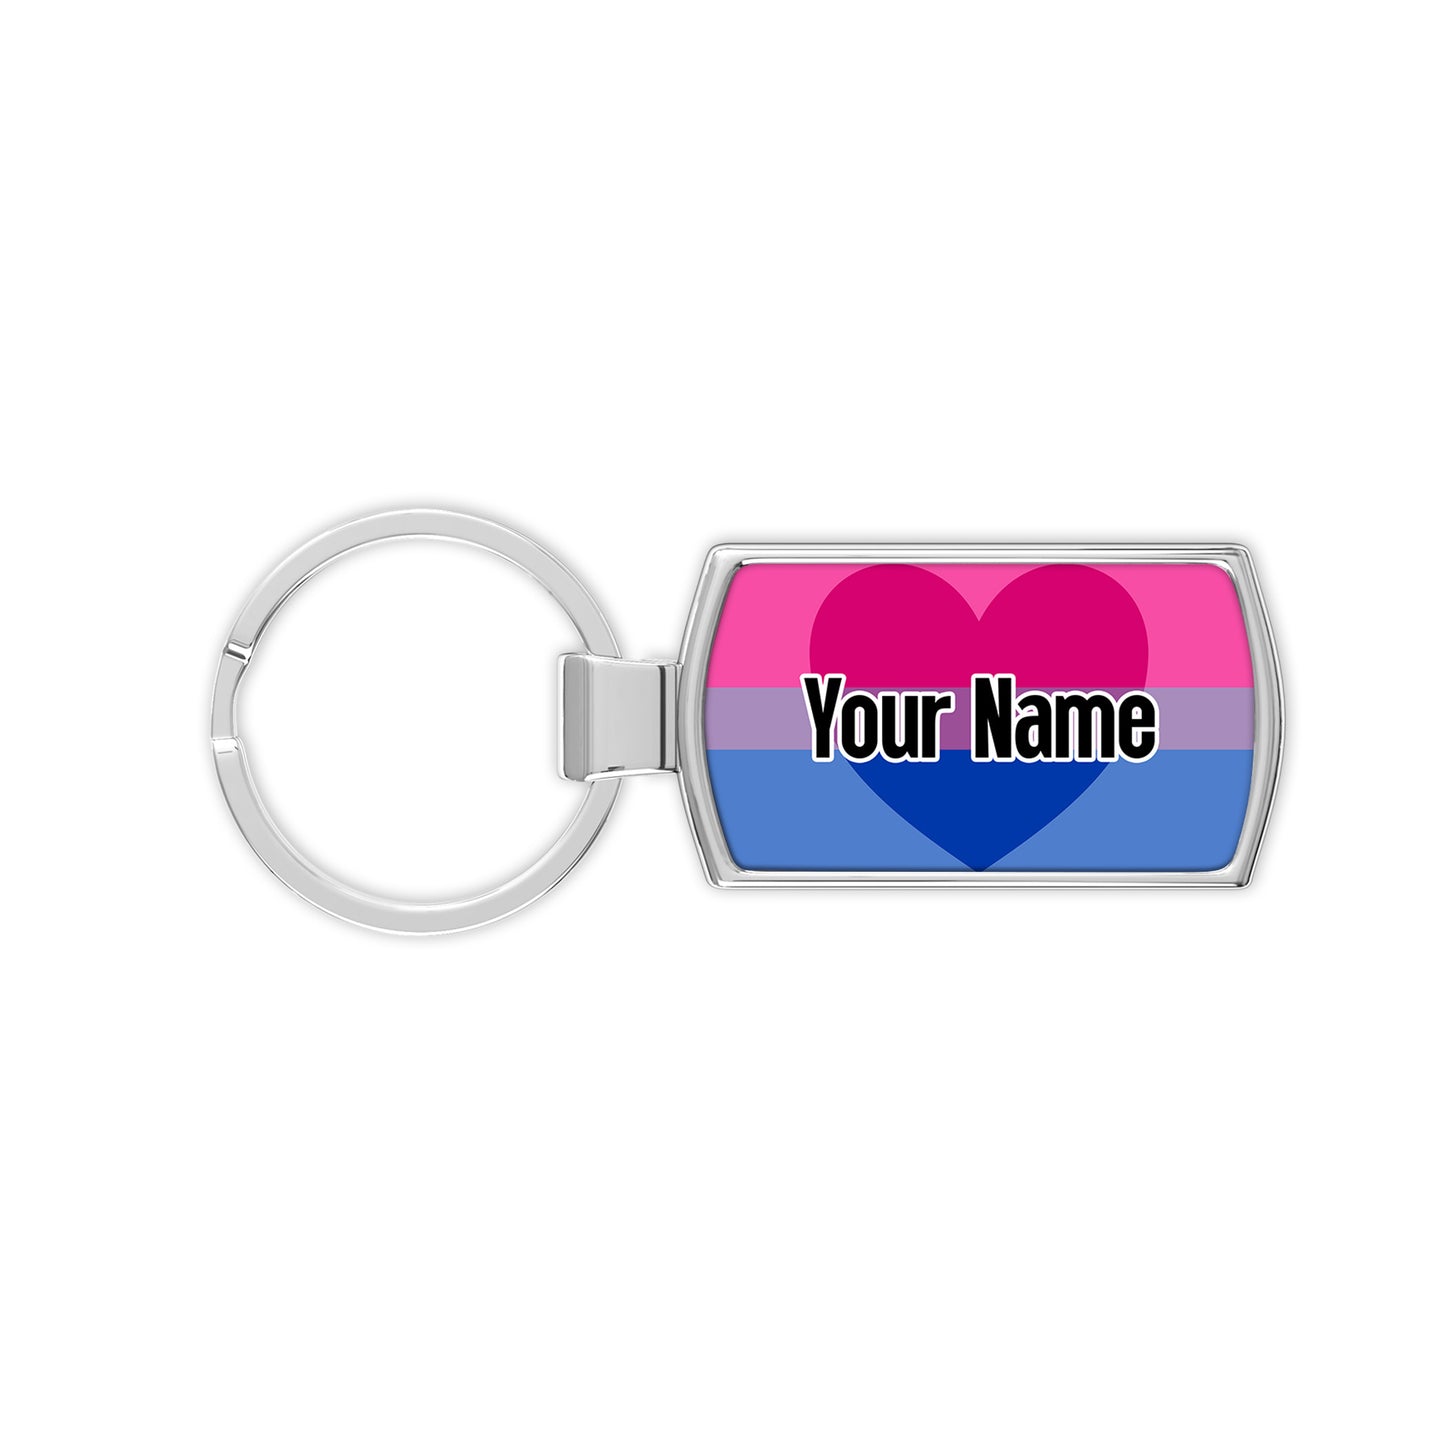 Biromantic pride flag metal keyring personalised with your name